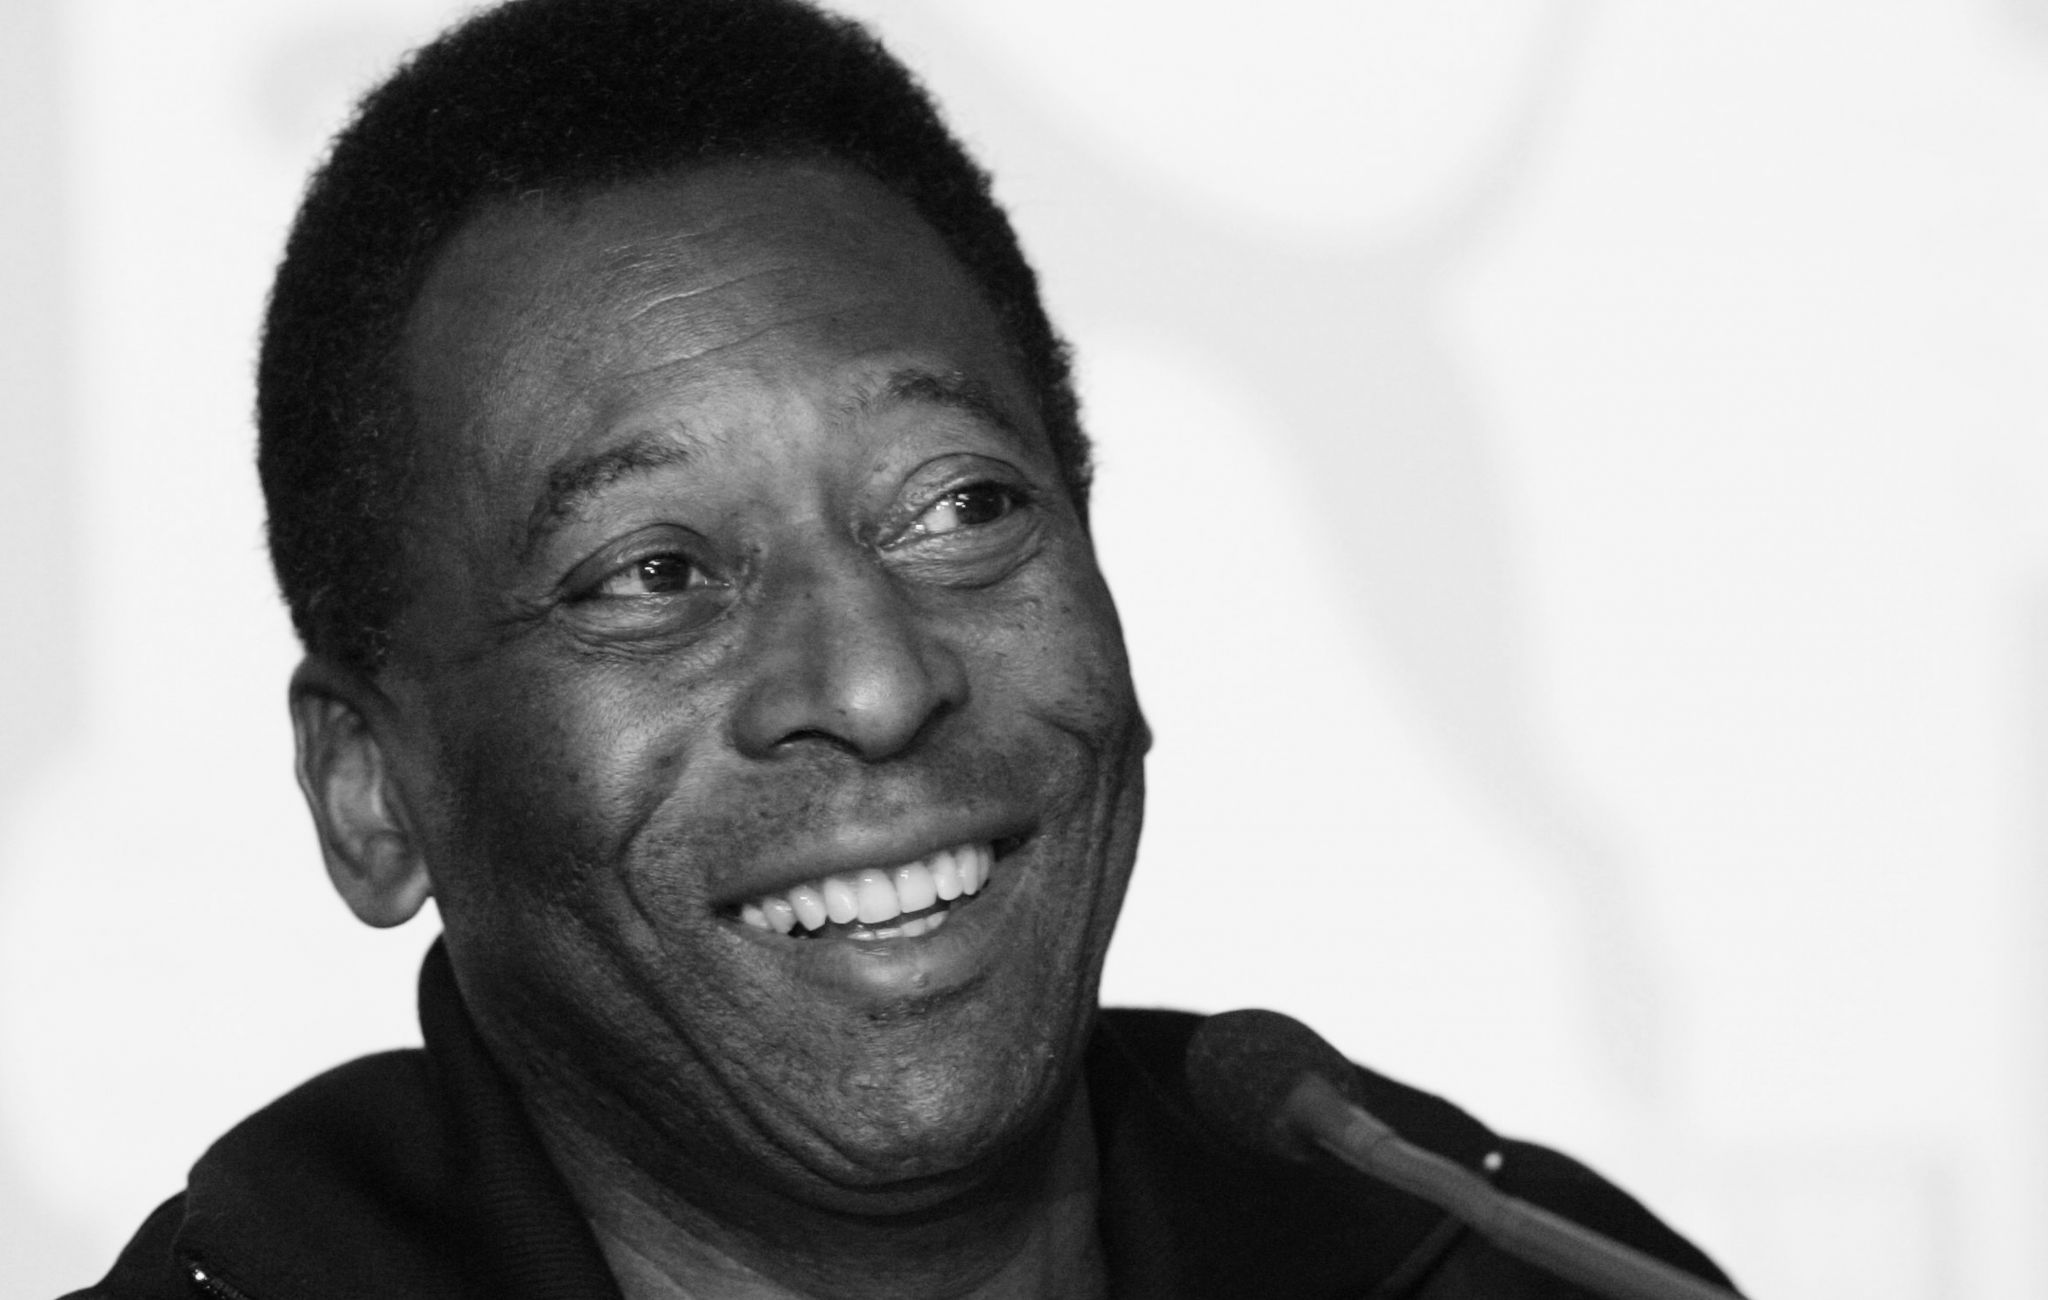 Grief on the loss of Pele